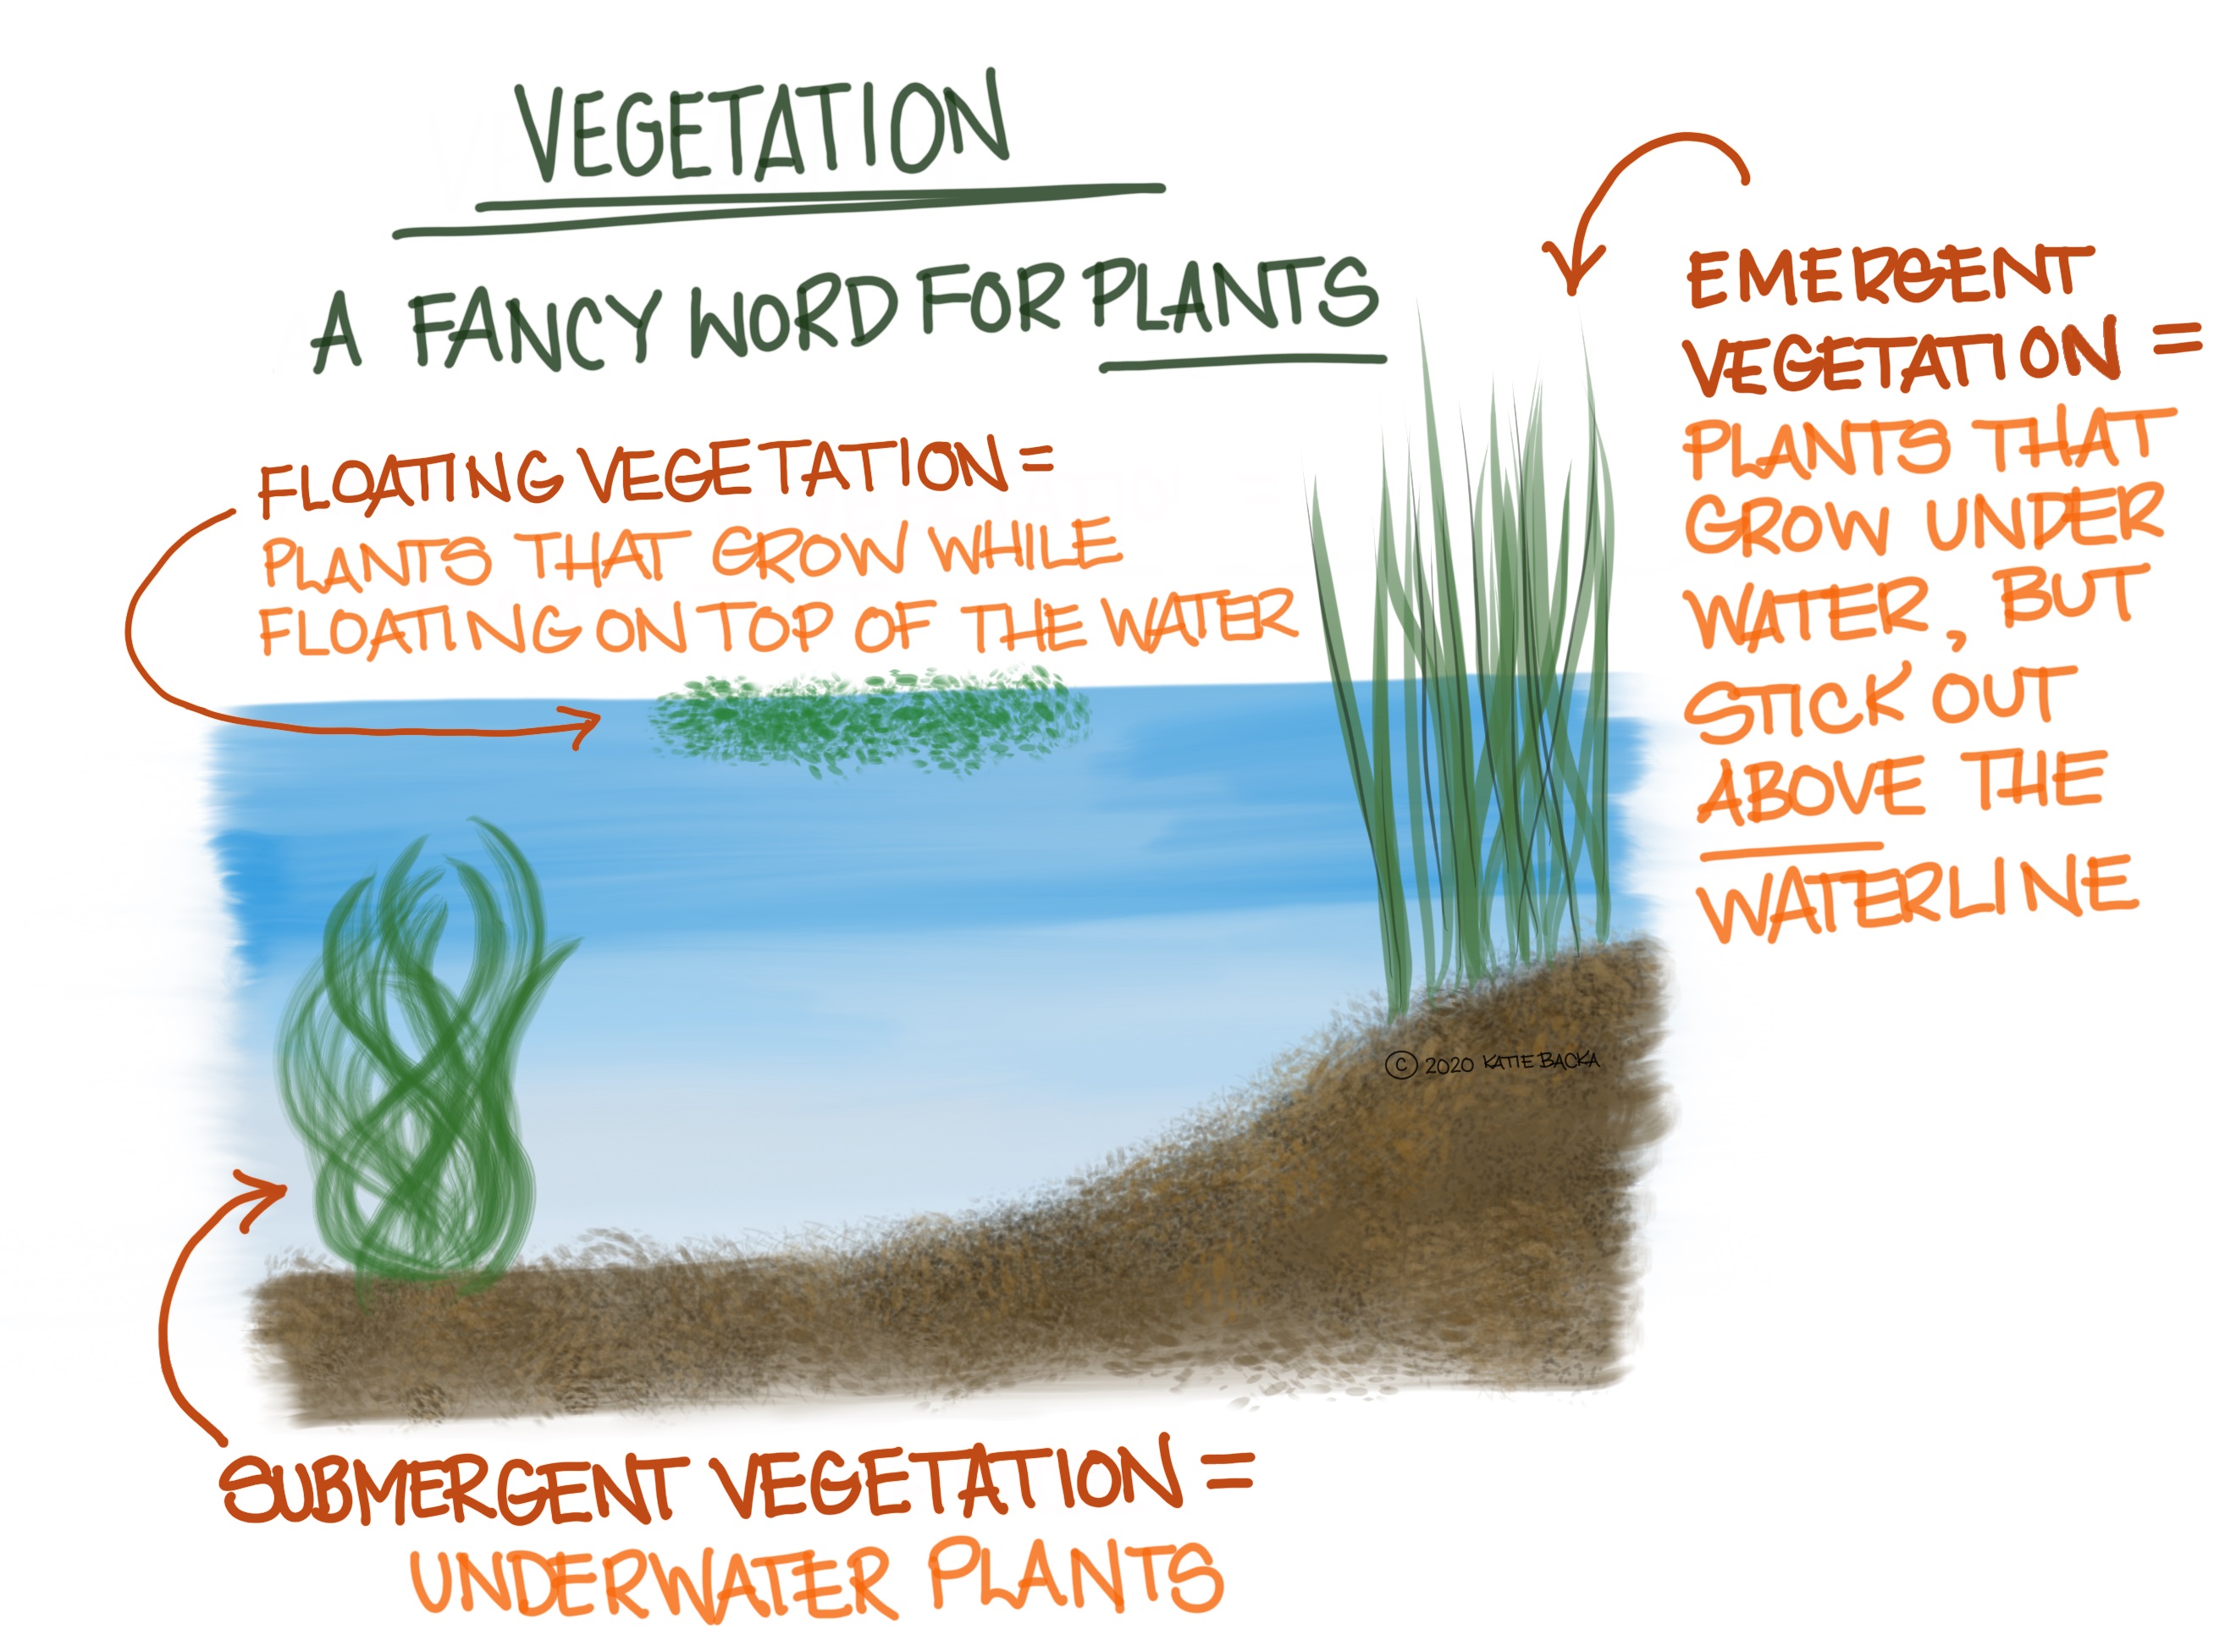 Script: Vegetation, a fancy word for plants - floating vegetation = plants that grow while floating on top of the water, emergent vegetation= plants that grow under water, but stick out above the waterline - submergent vegetation = underwater plants